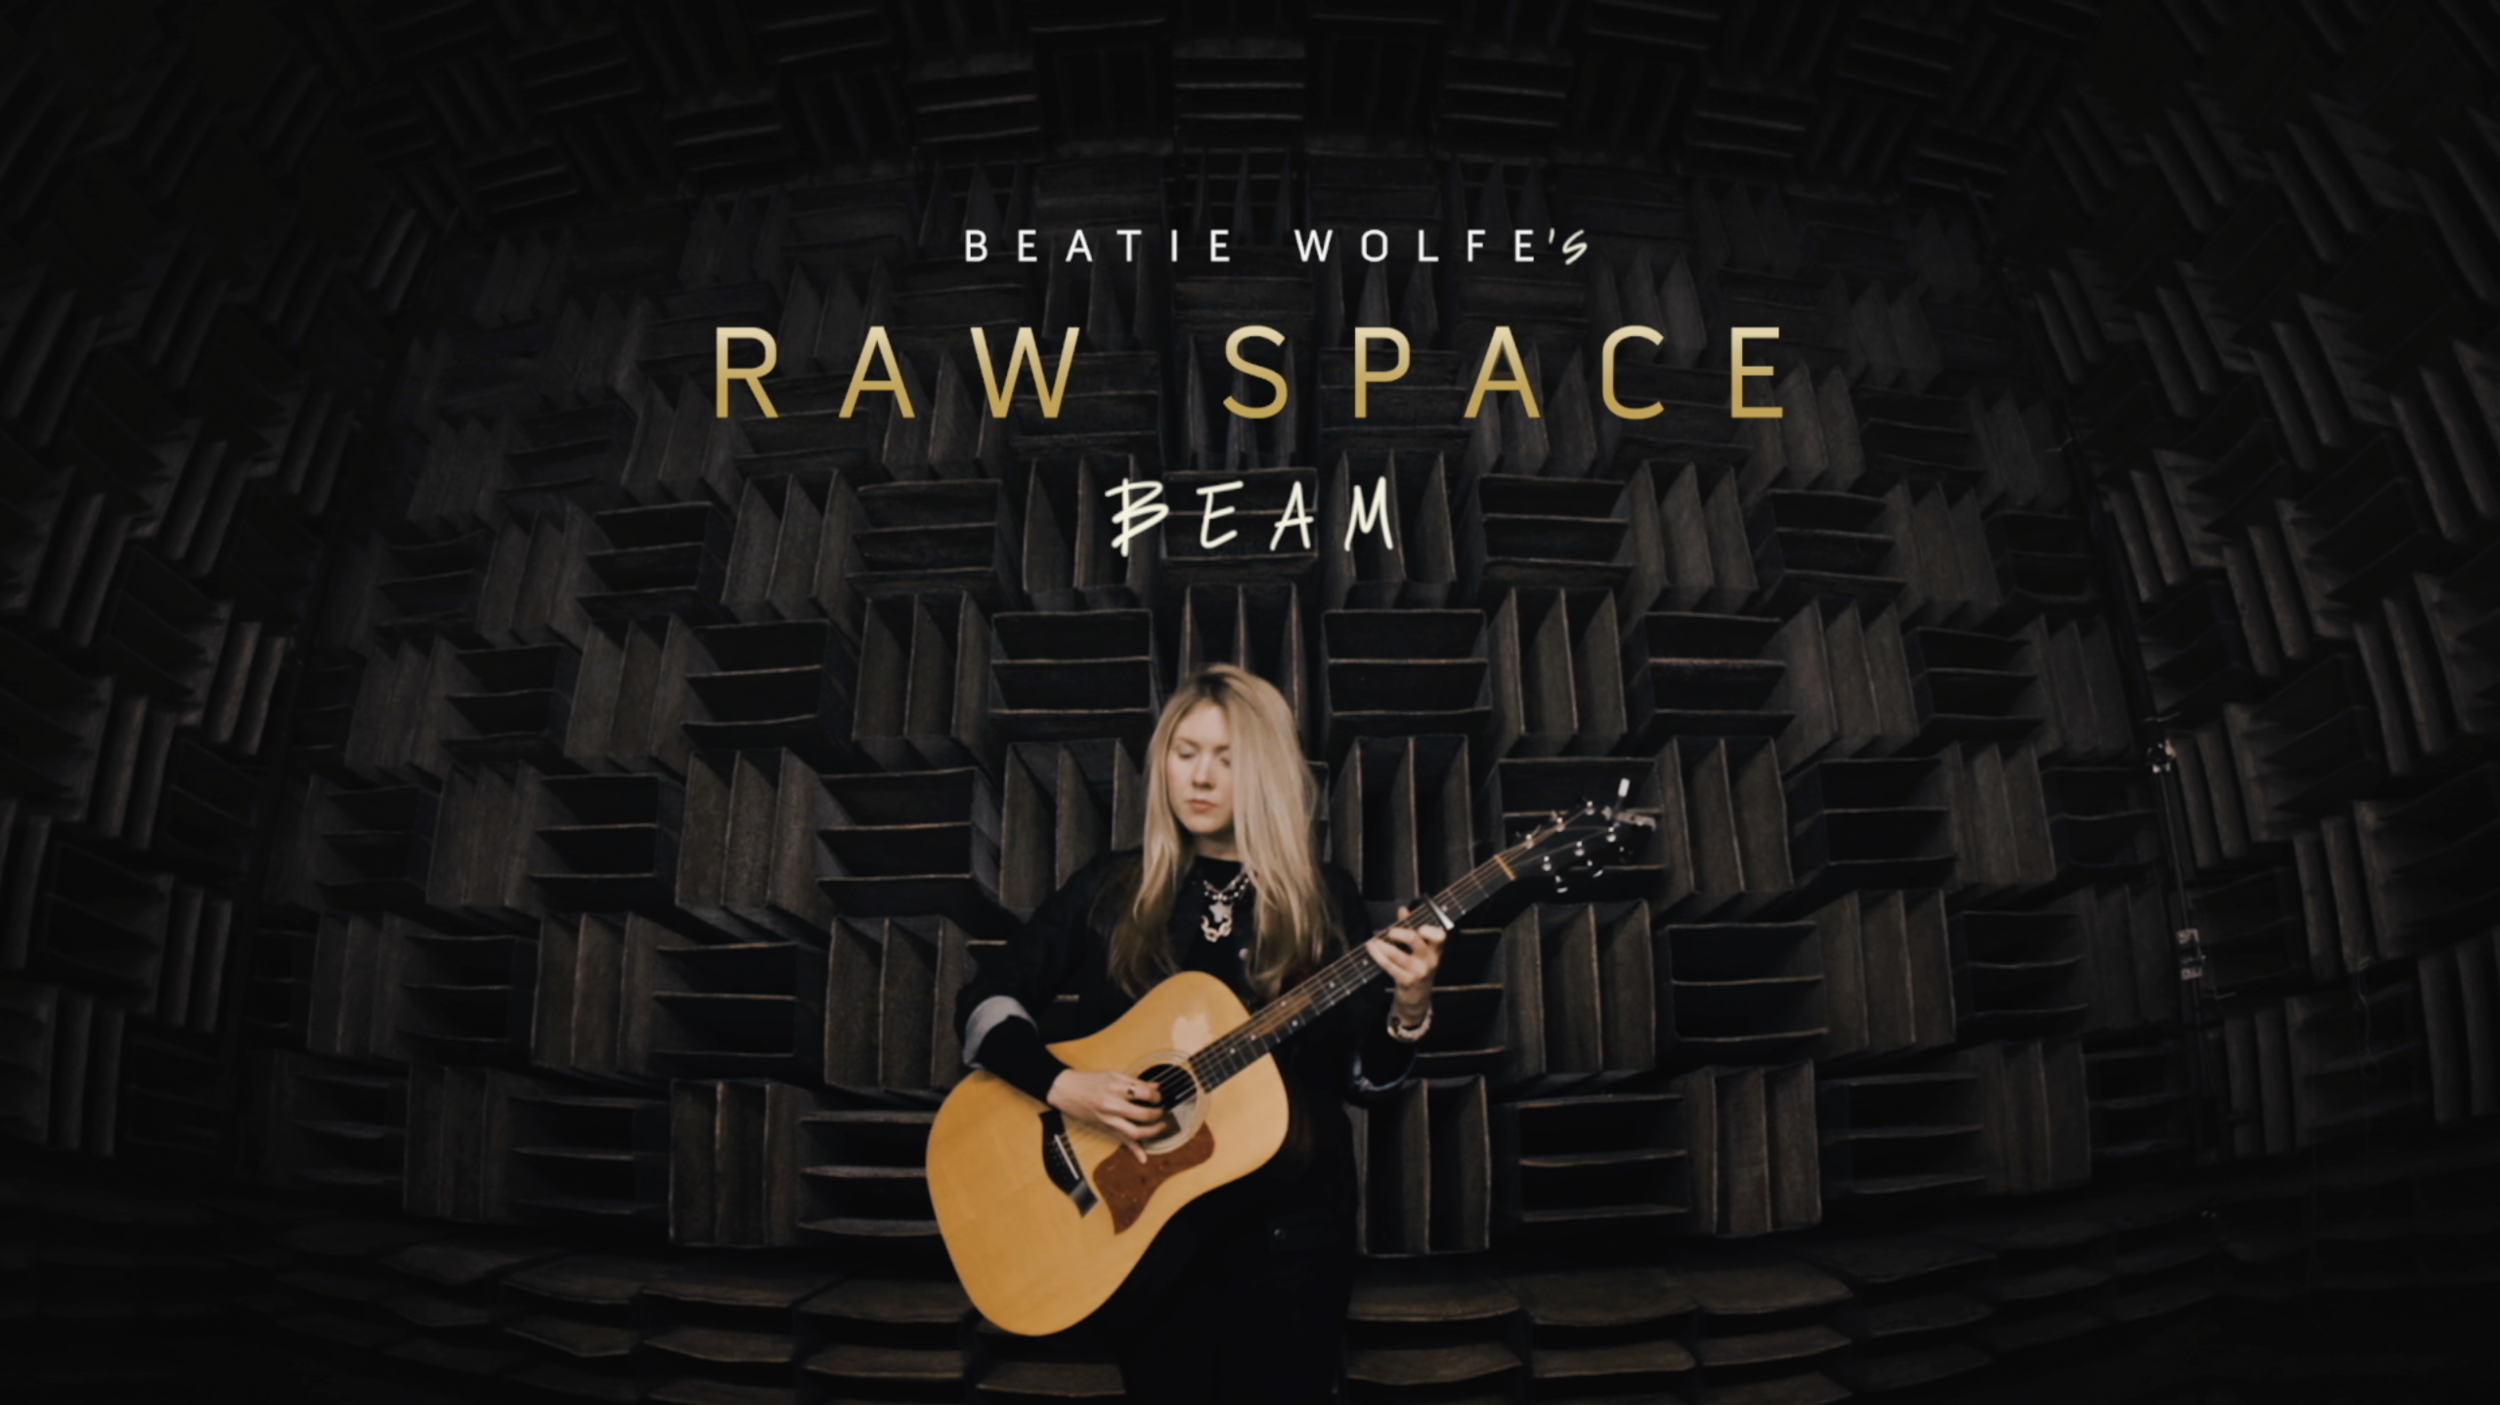 Beatie Wolfe - 2018 Raw Space Beam - Bell Labs Anechoic Chamber.png